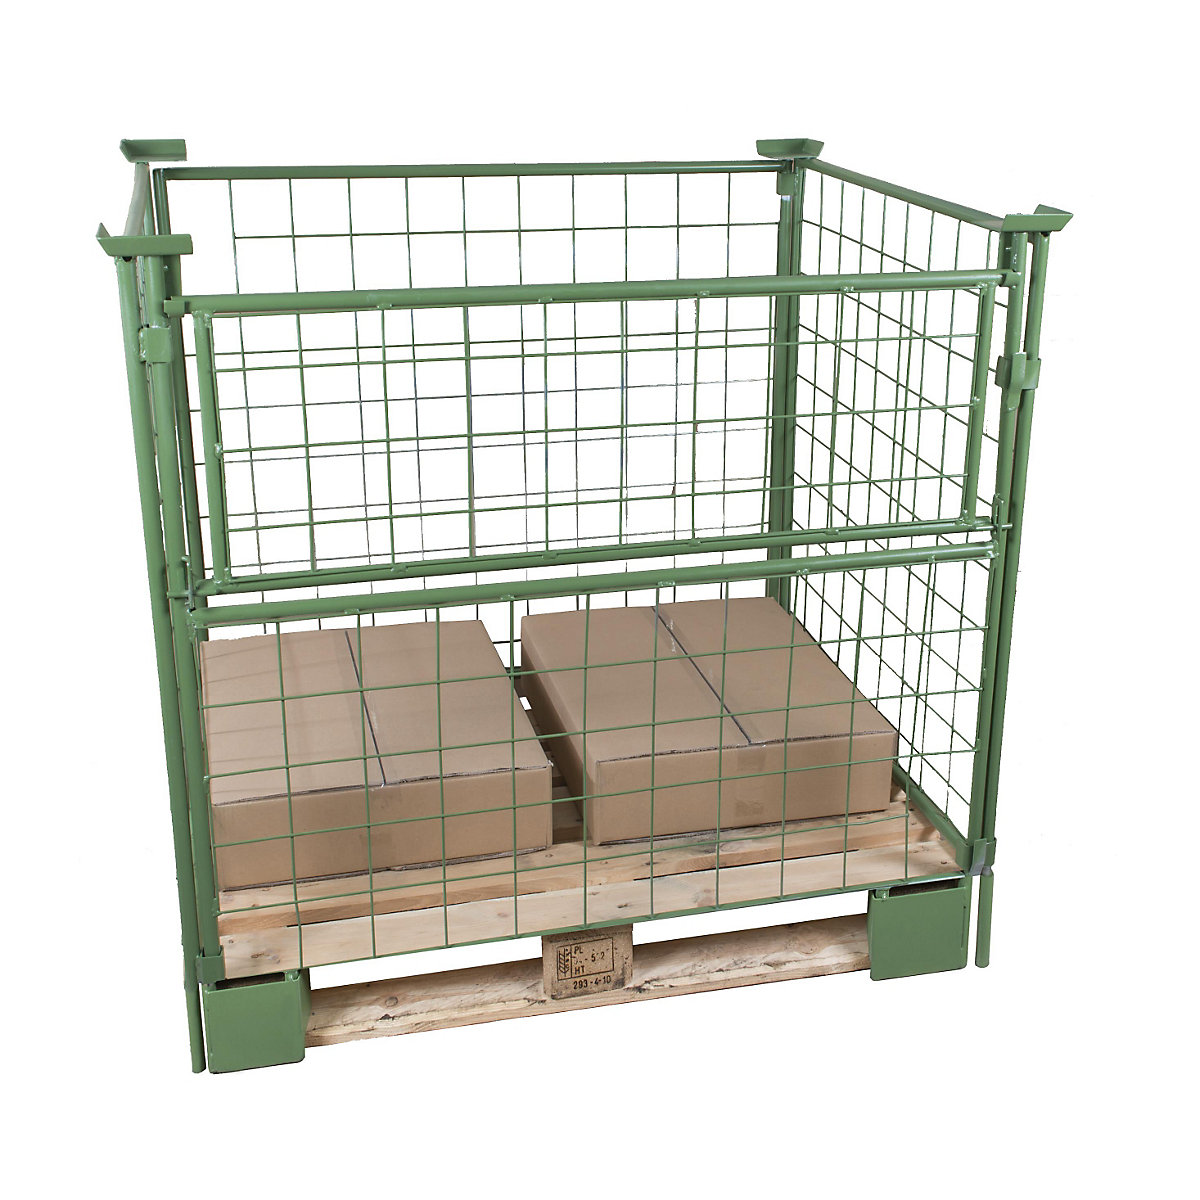 Pallet frame, effective height 1800 mm, for stacking, WxL 800 x 1200 mm, 1 long side can be half folded-2